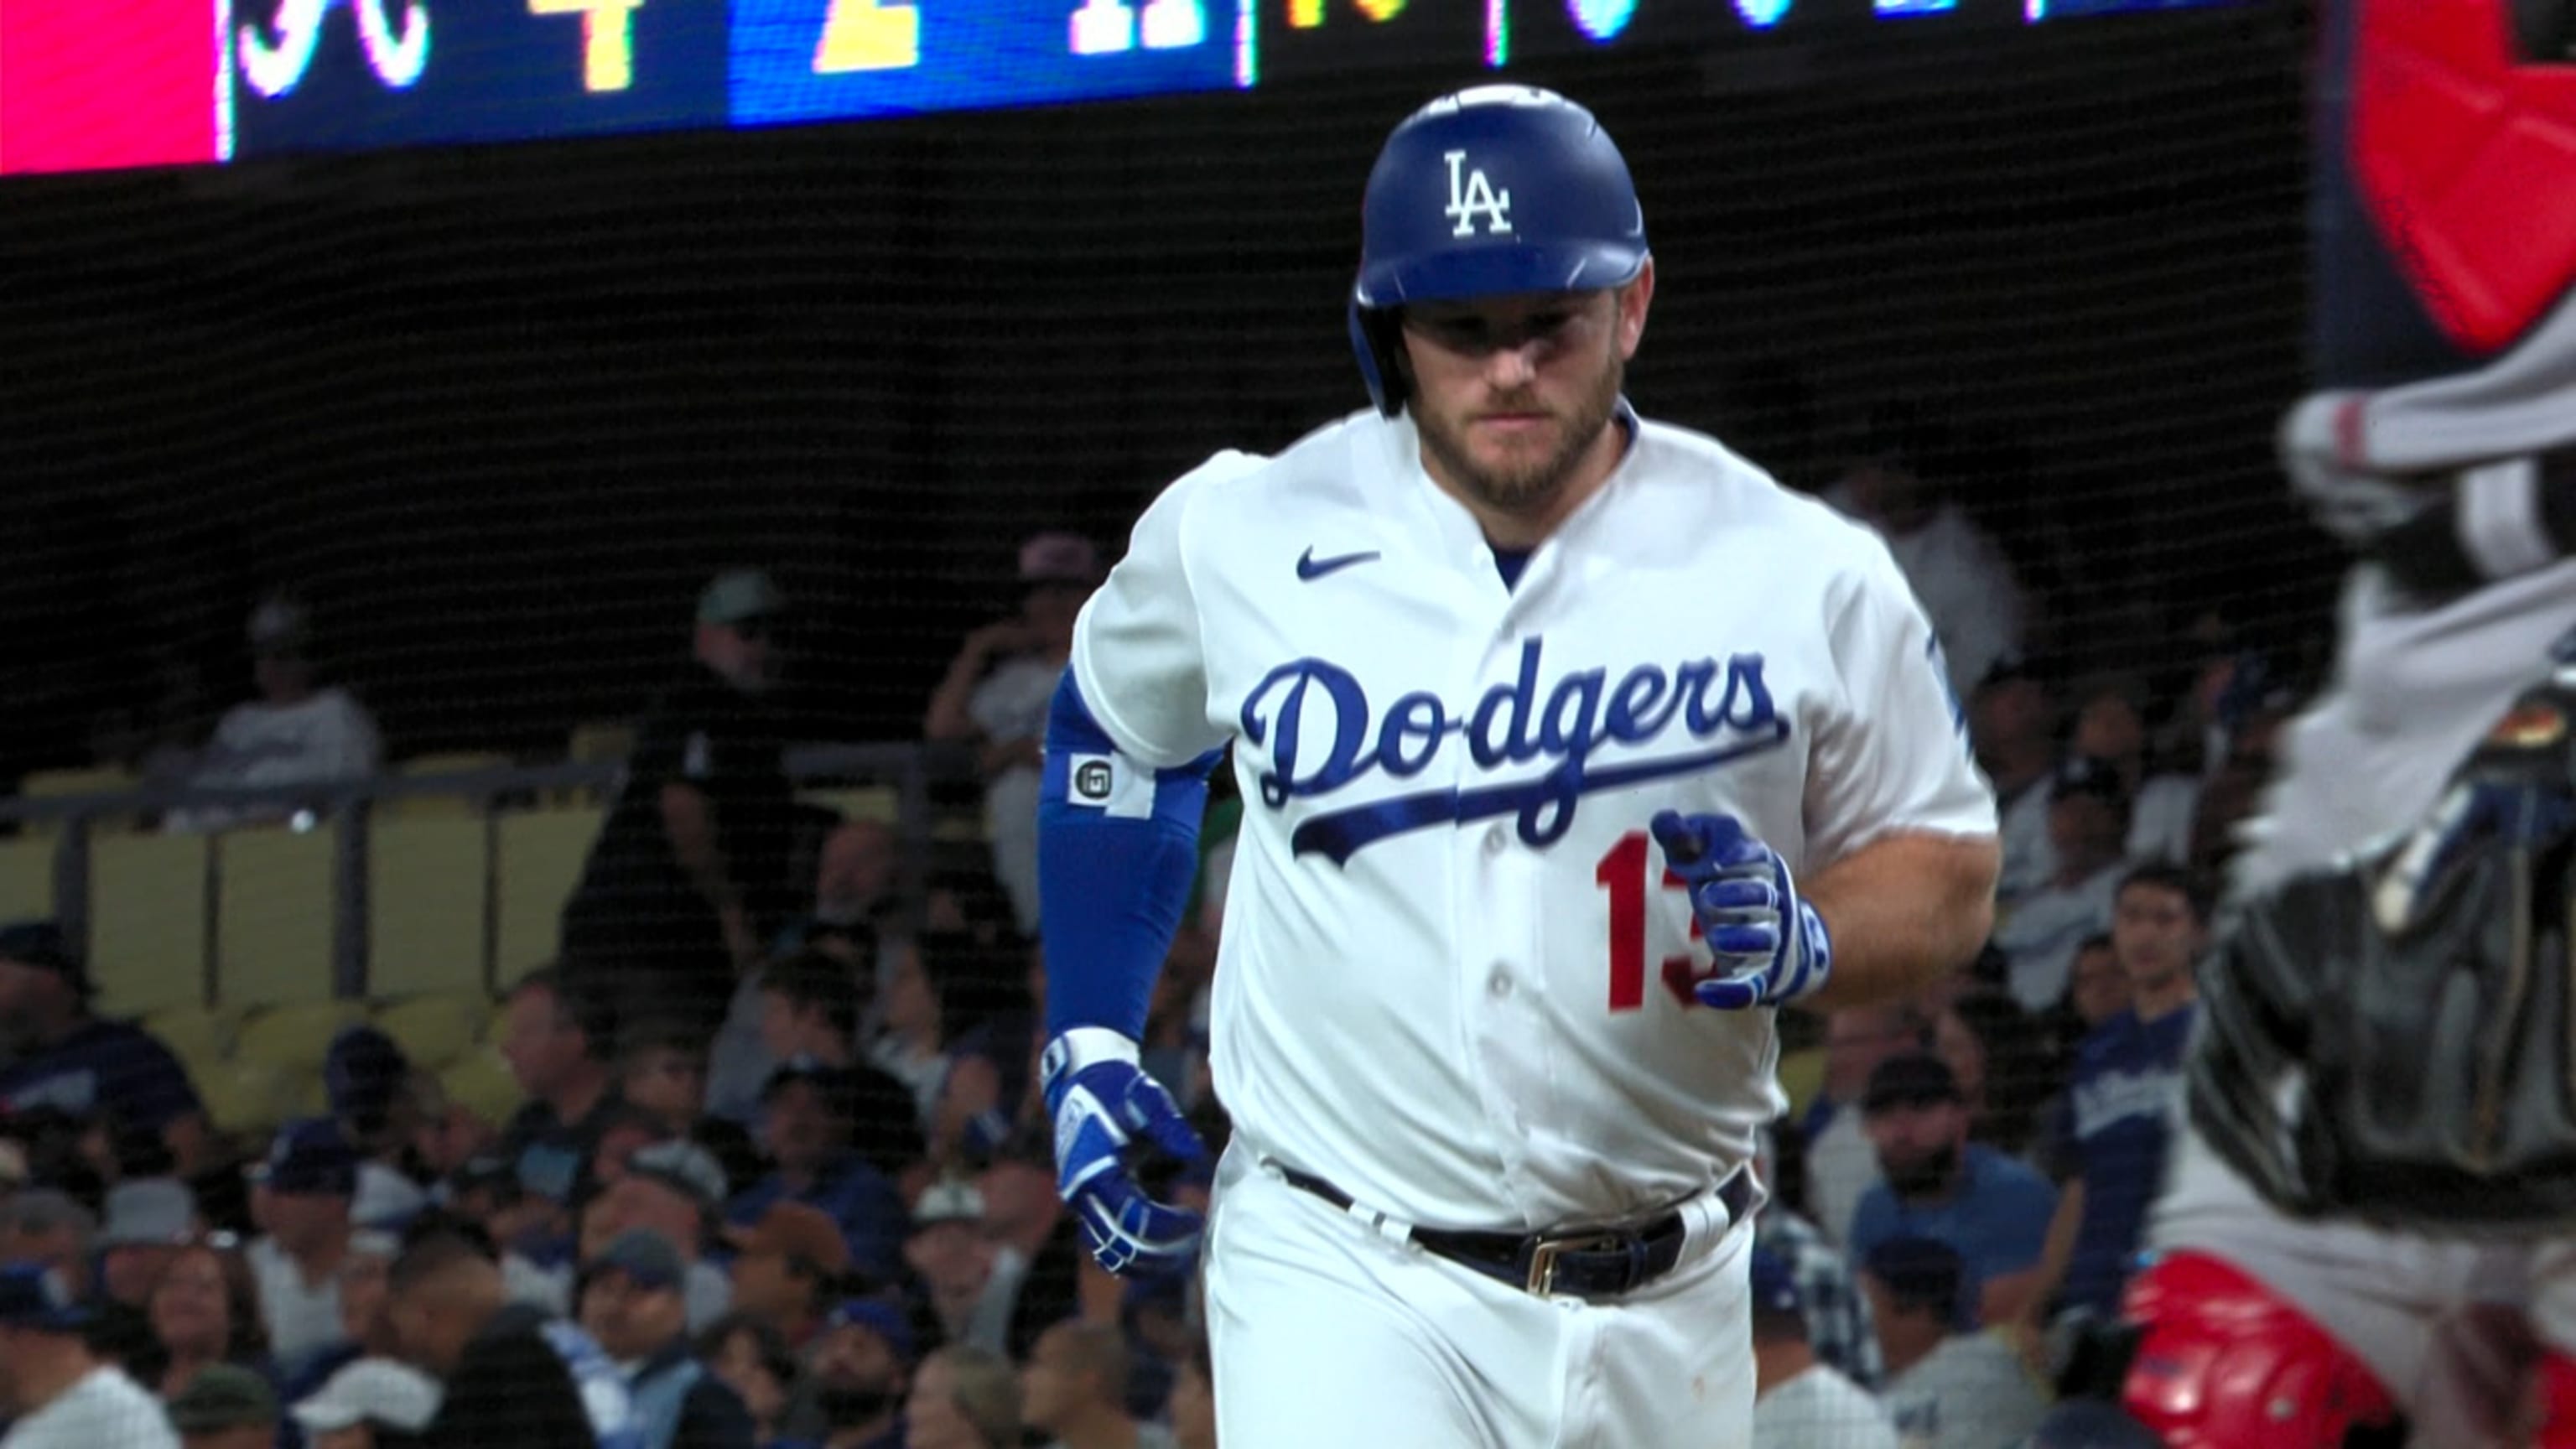 Dodgers' season is over as talk is cheap against streaking Braves